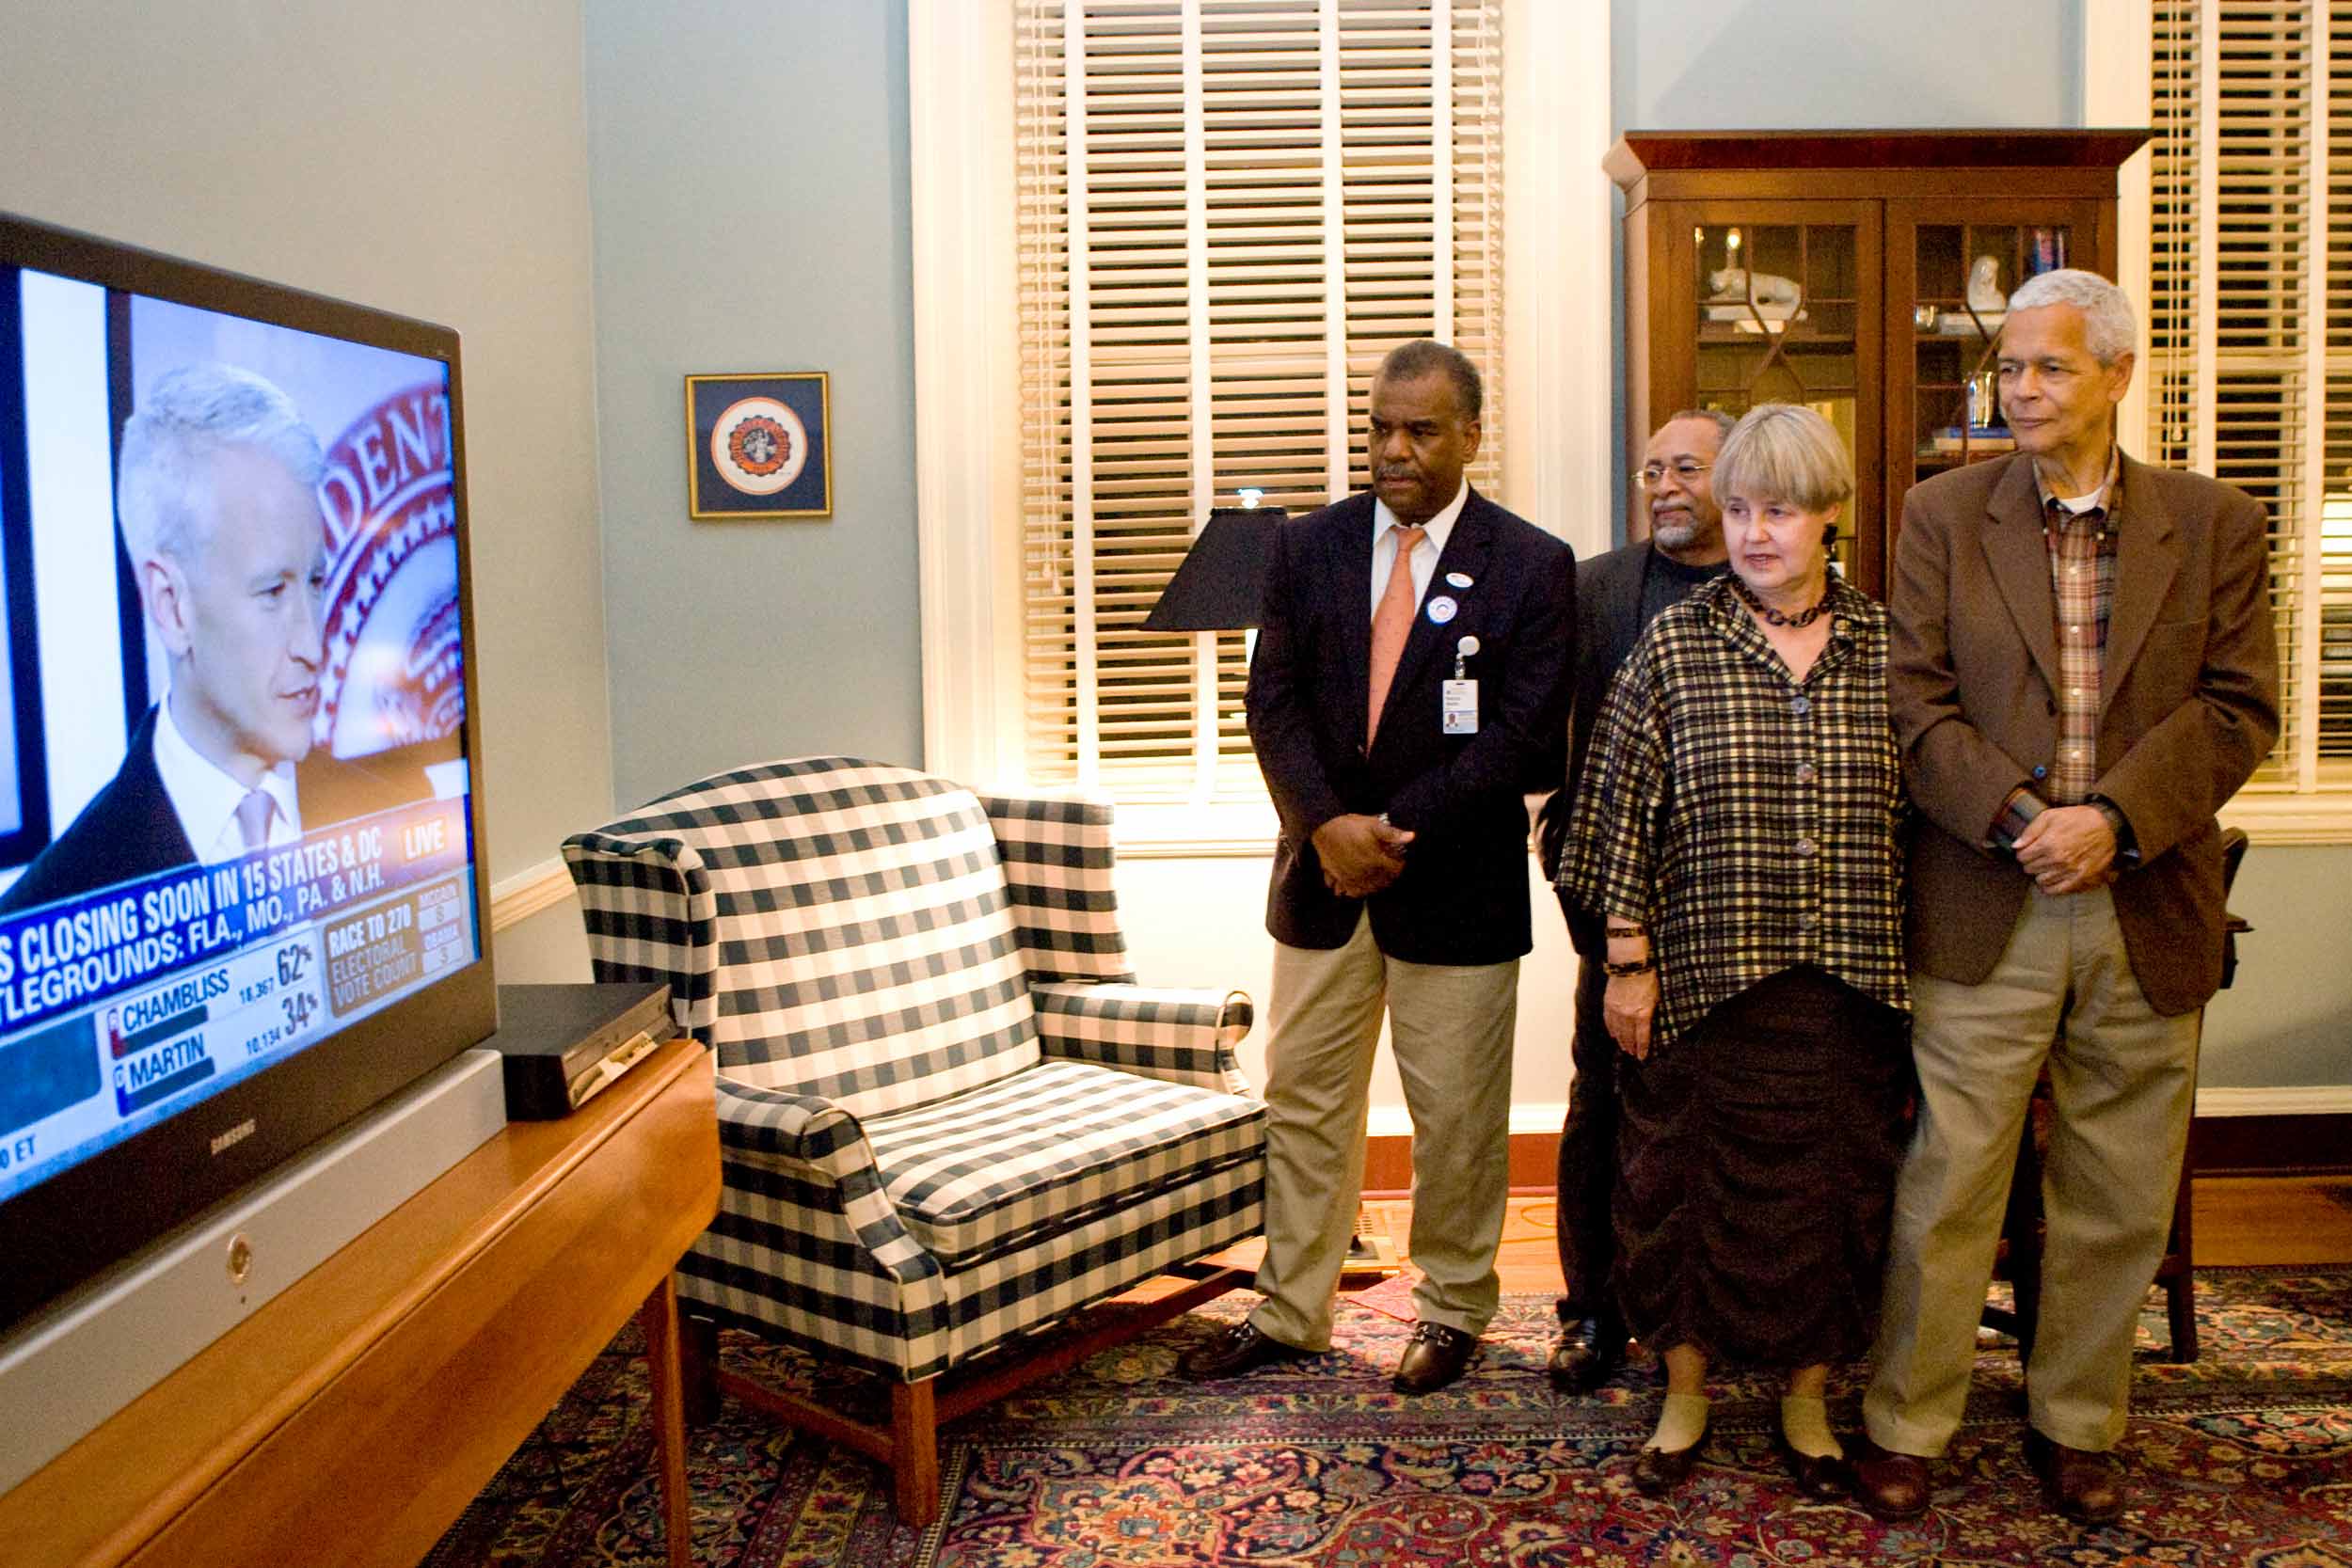 Dr. Marcus Martin, Pam Horowitz, and Julian Bond watching the 2008 election results coming in on T.V.